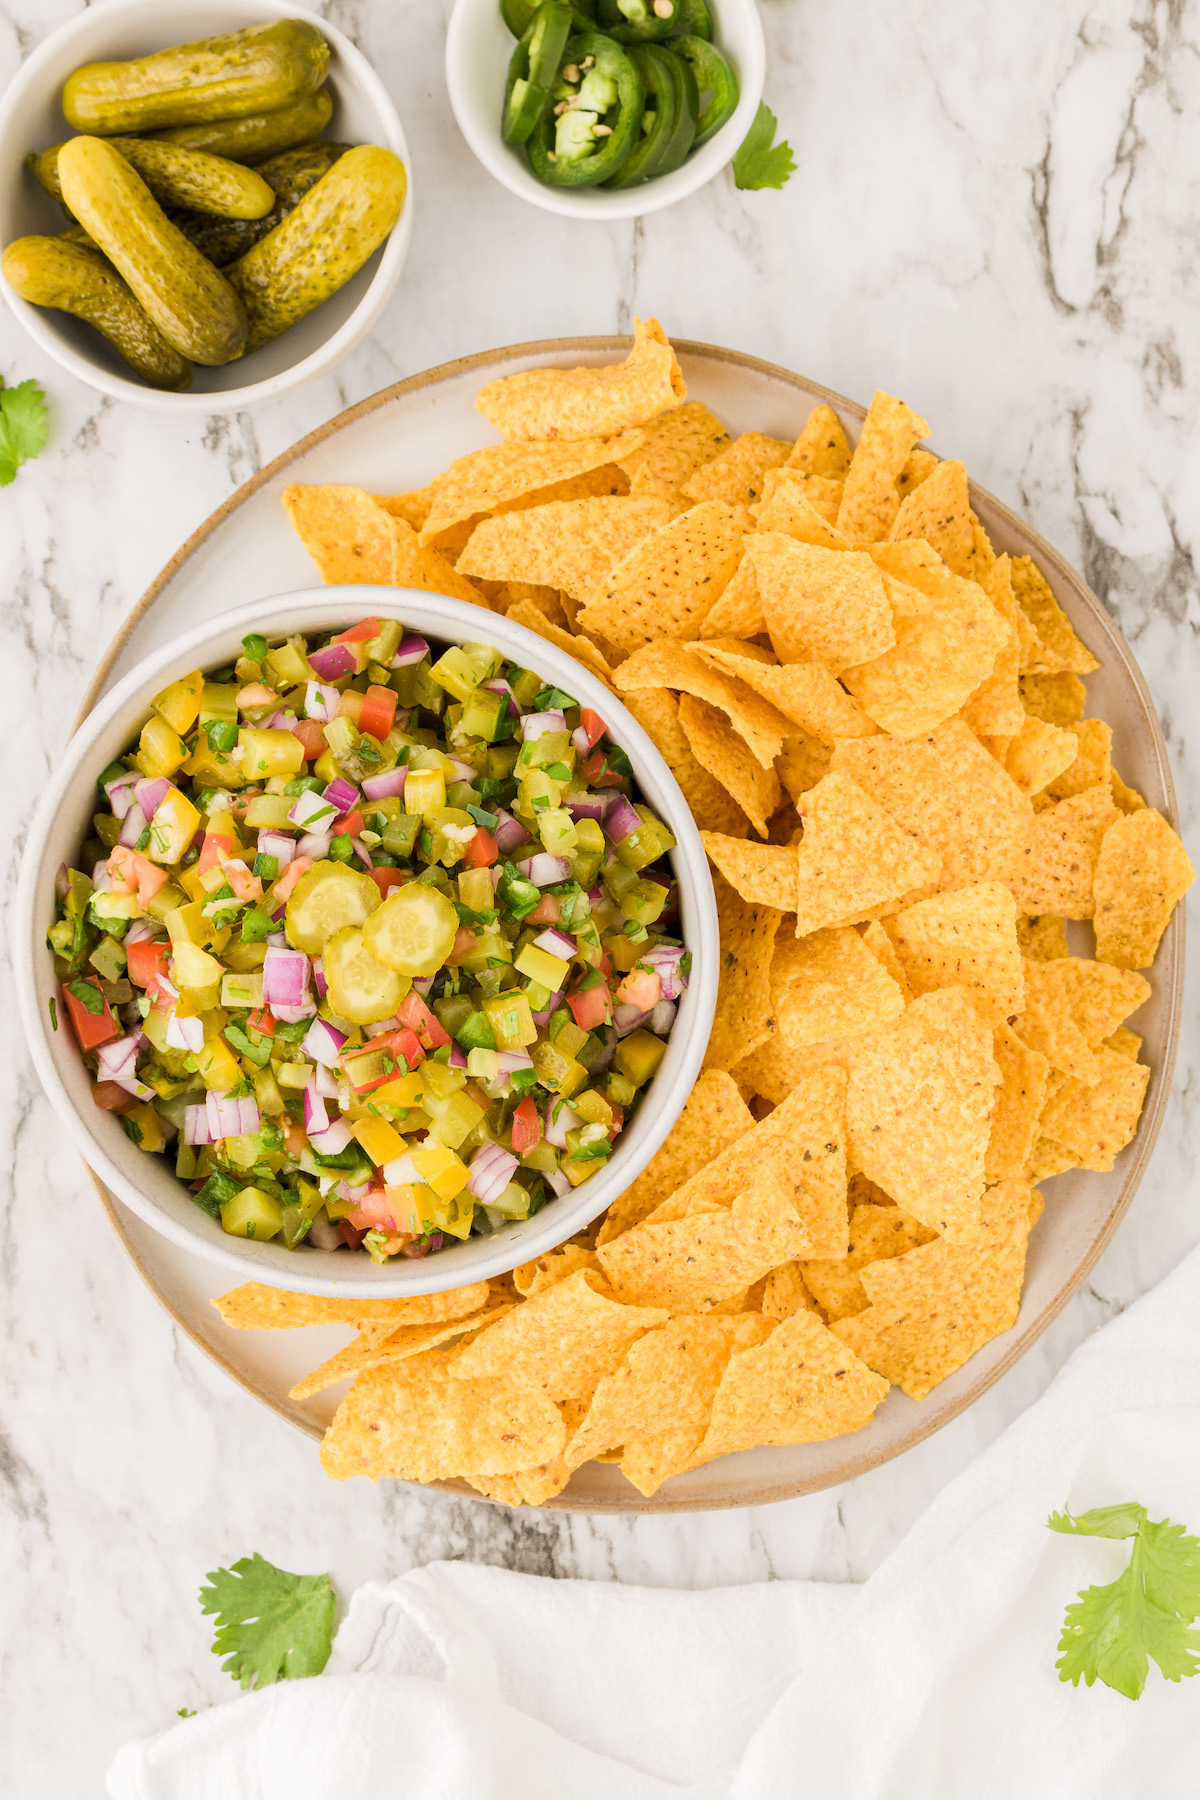 Overhead view of tortilla chips and bowl of pickle de gallo on tray